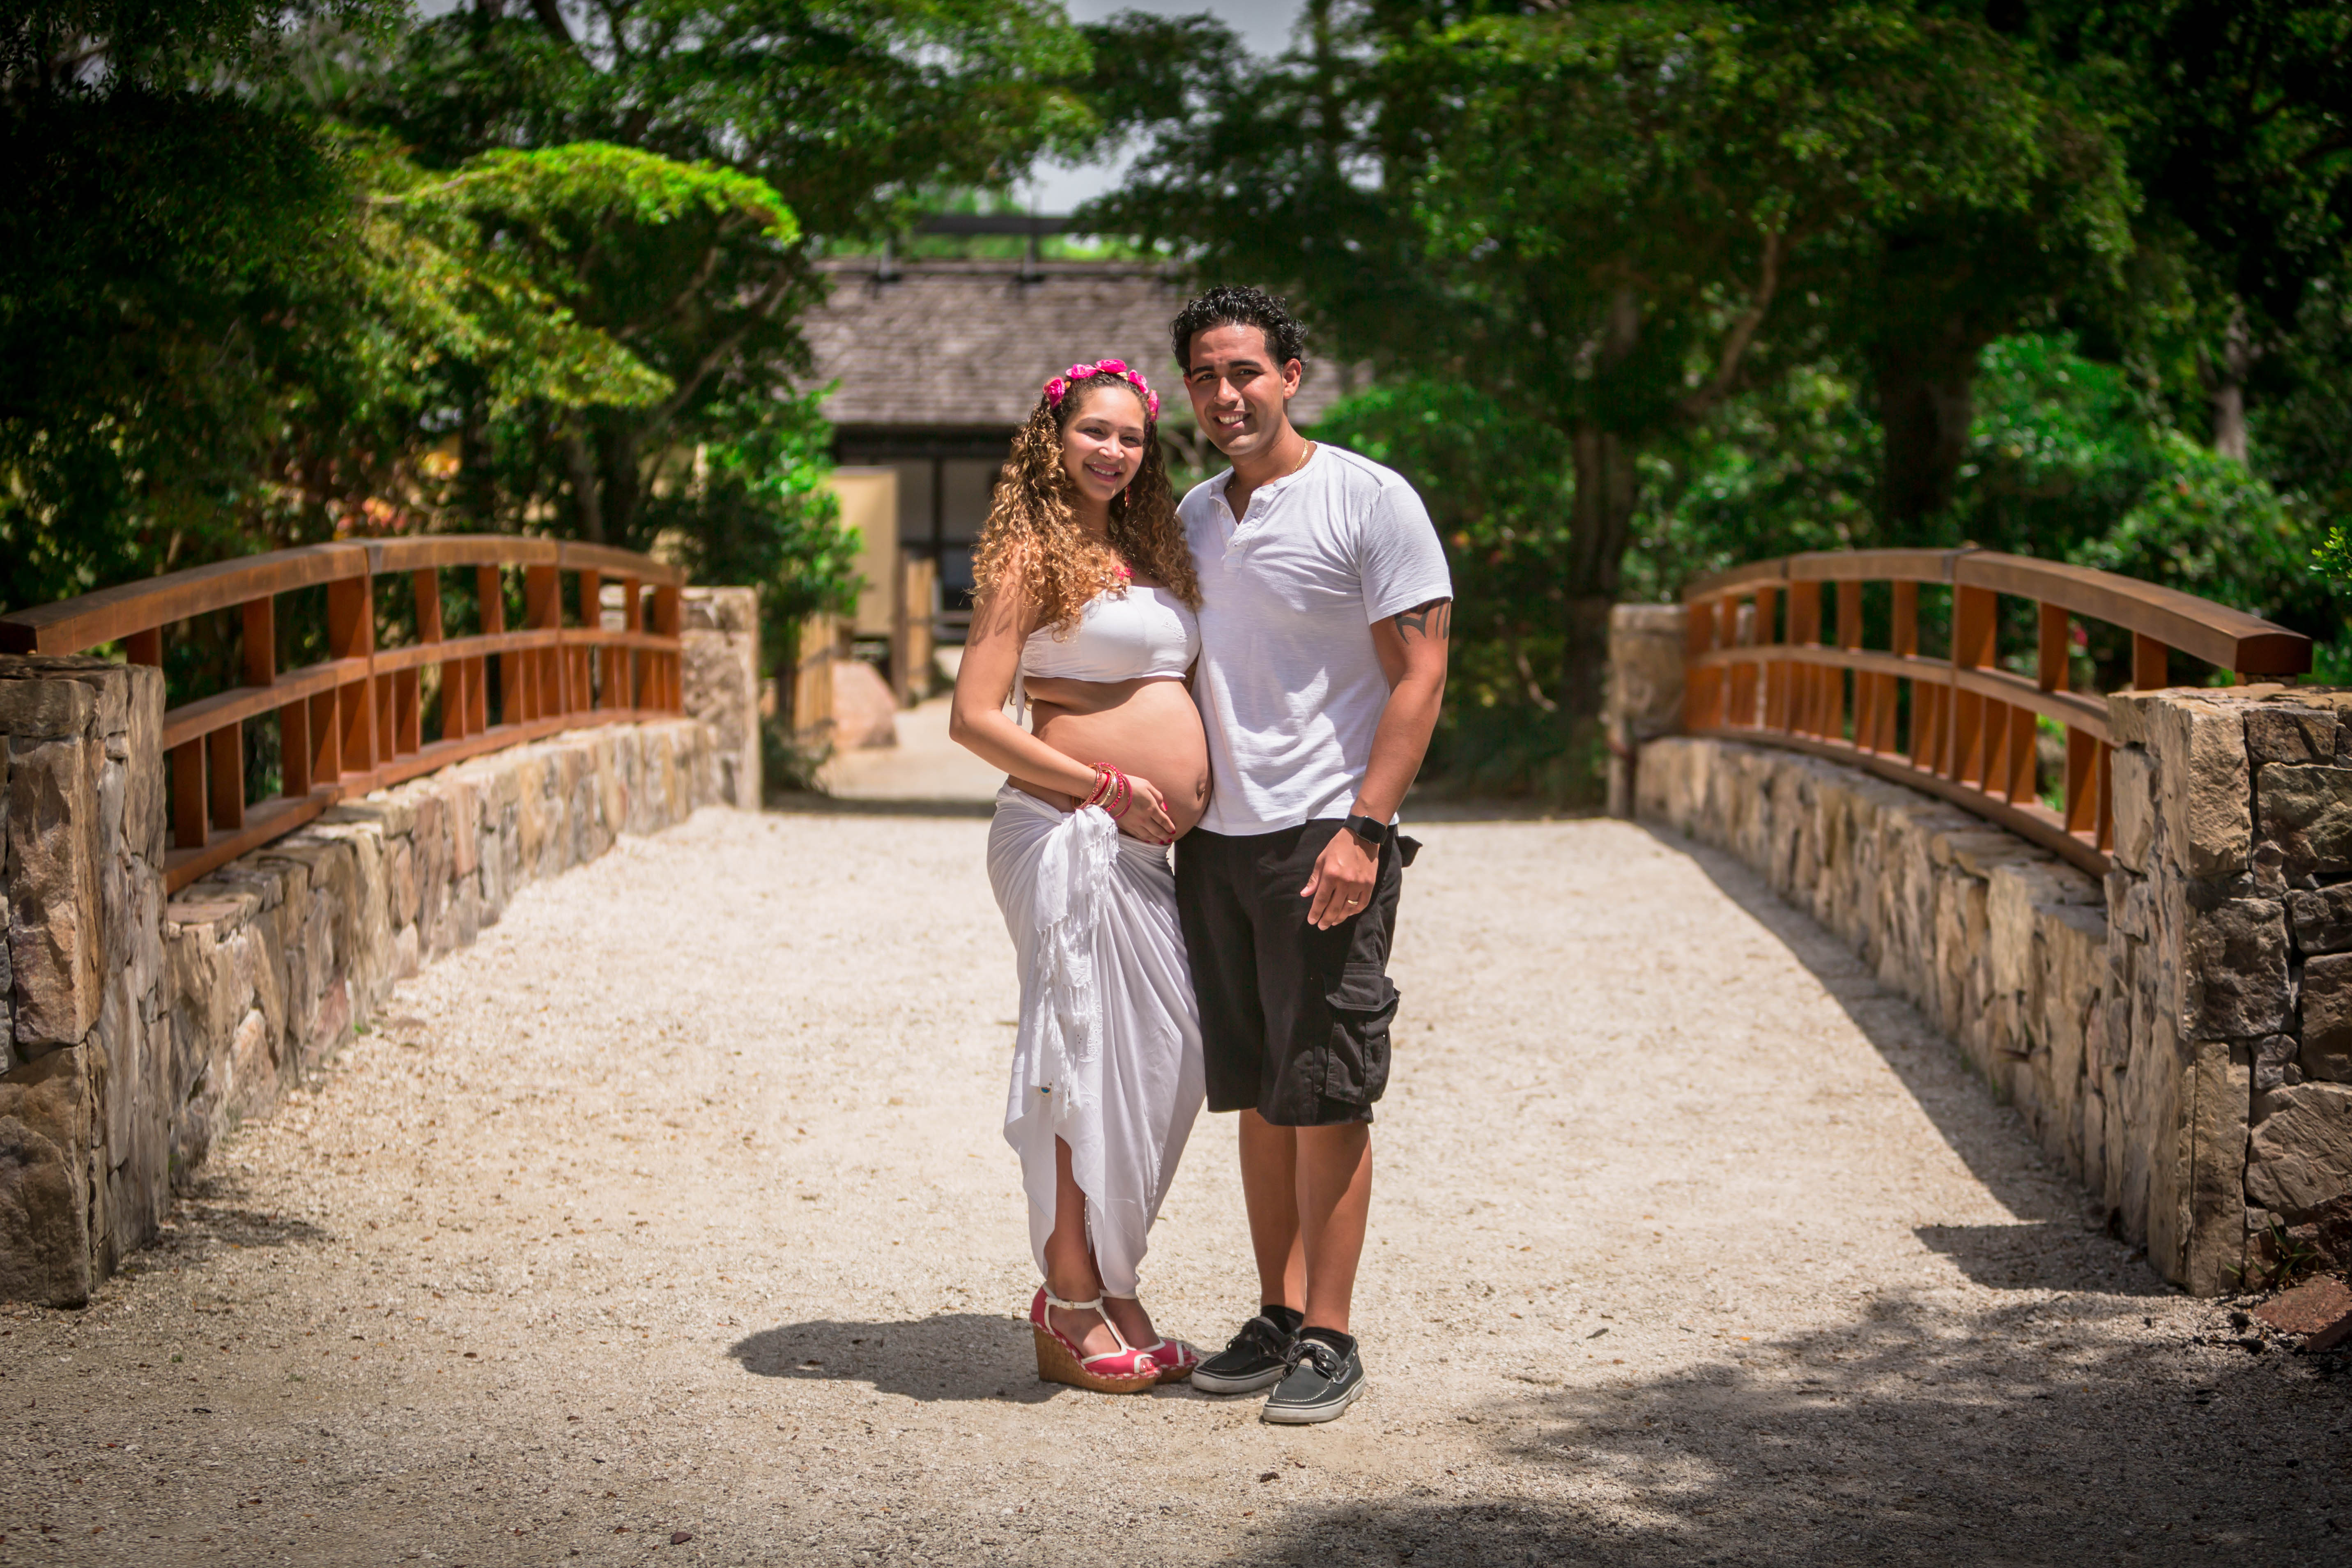 Alfredo Valentine Couture Bridal Photography Maternity Session at Morikami Japanese Gardens in Delray Beach, Florida